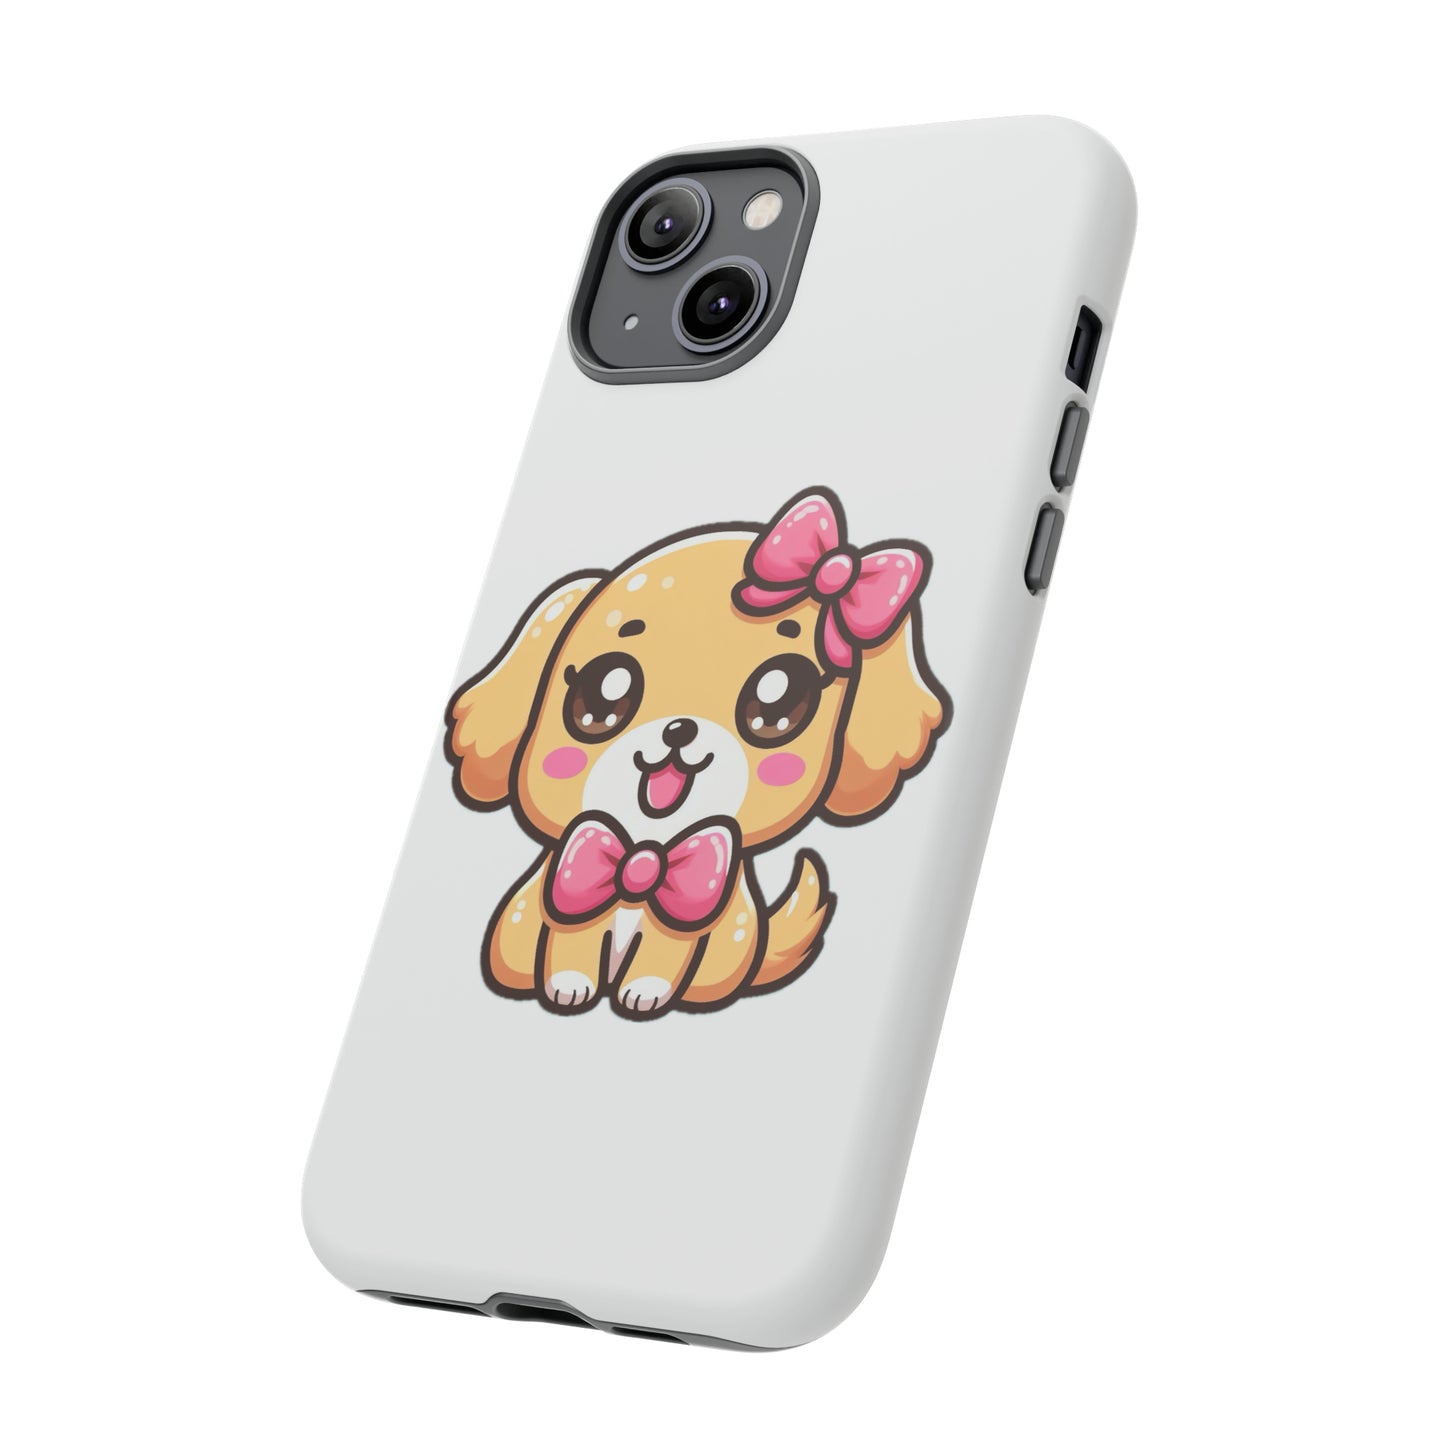 Adorable Kawaii Golden Labrador Retriever Puppy Phone Case with Pink Bow - Perfect Gift for Dog Lovers